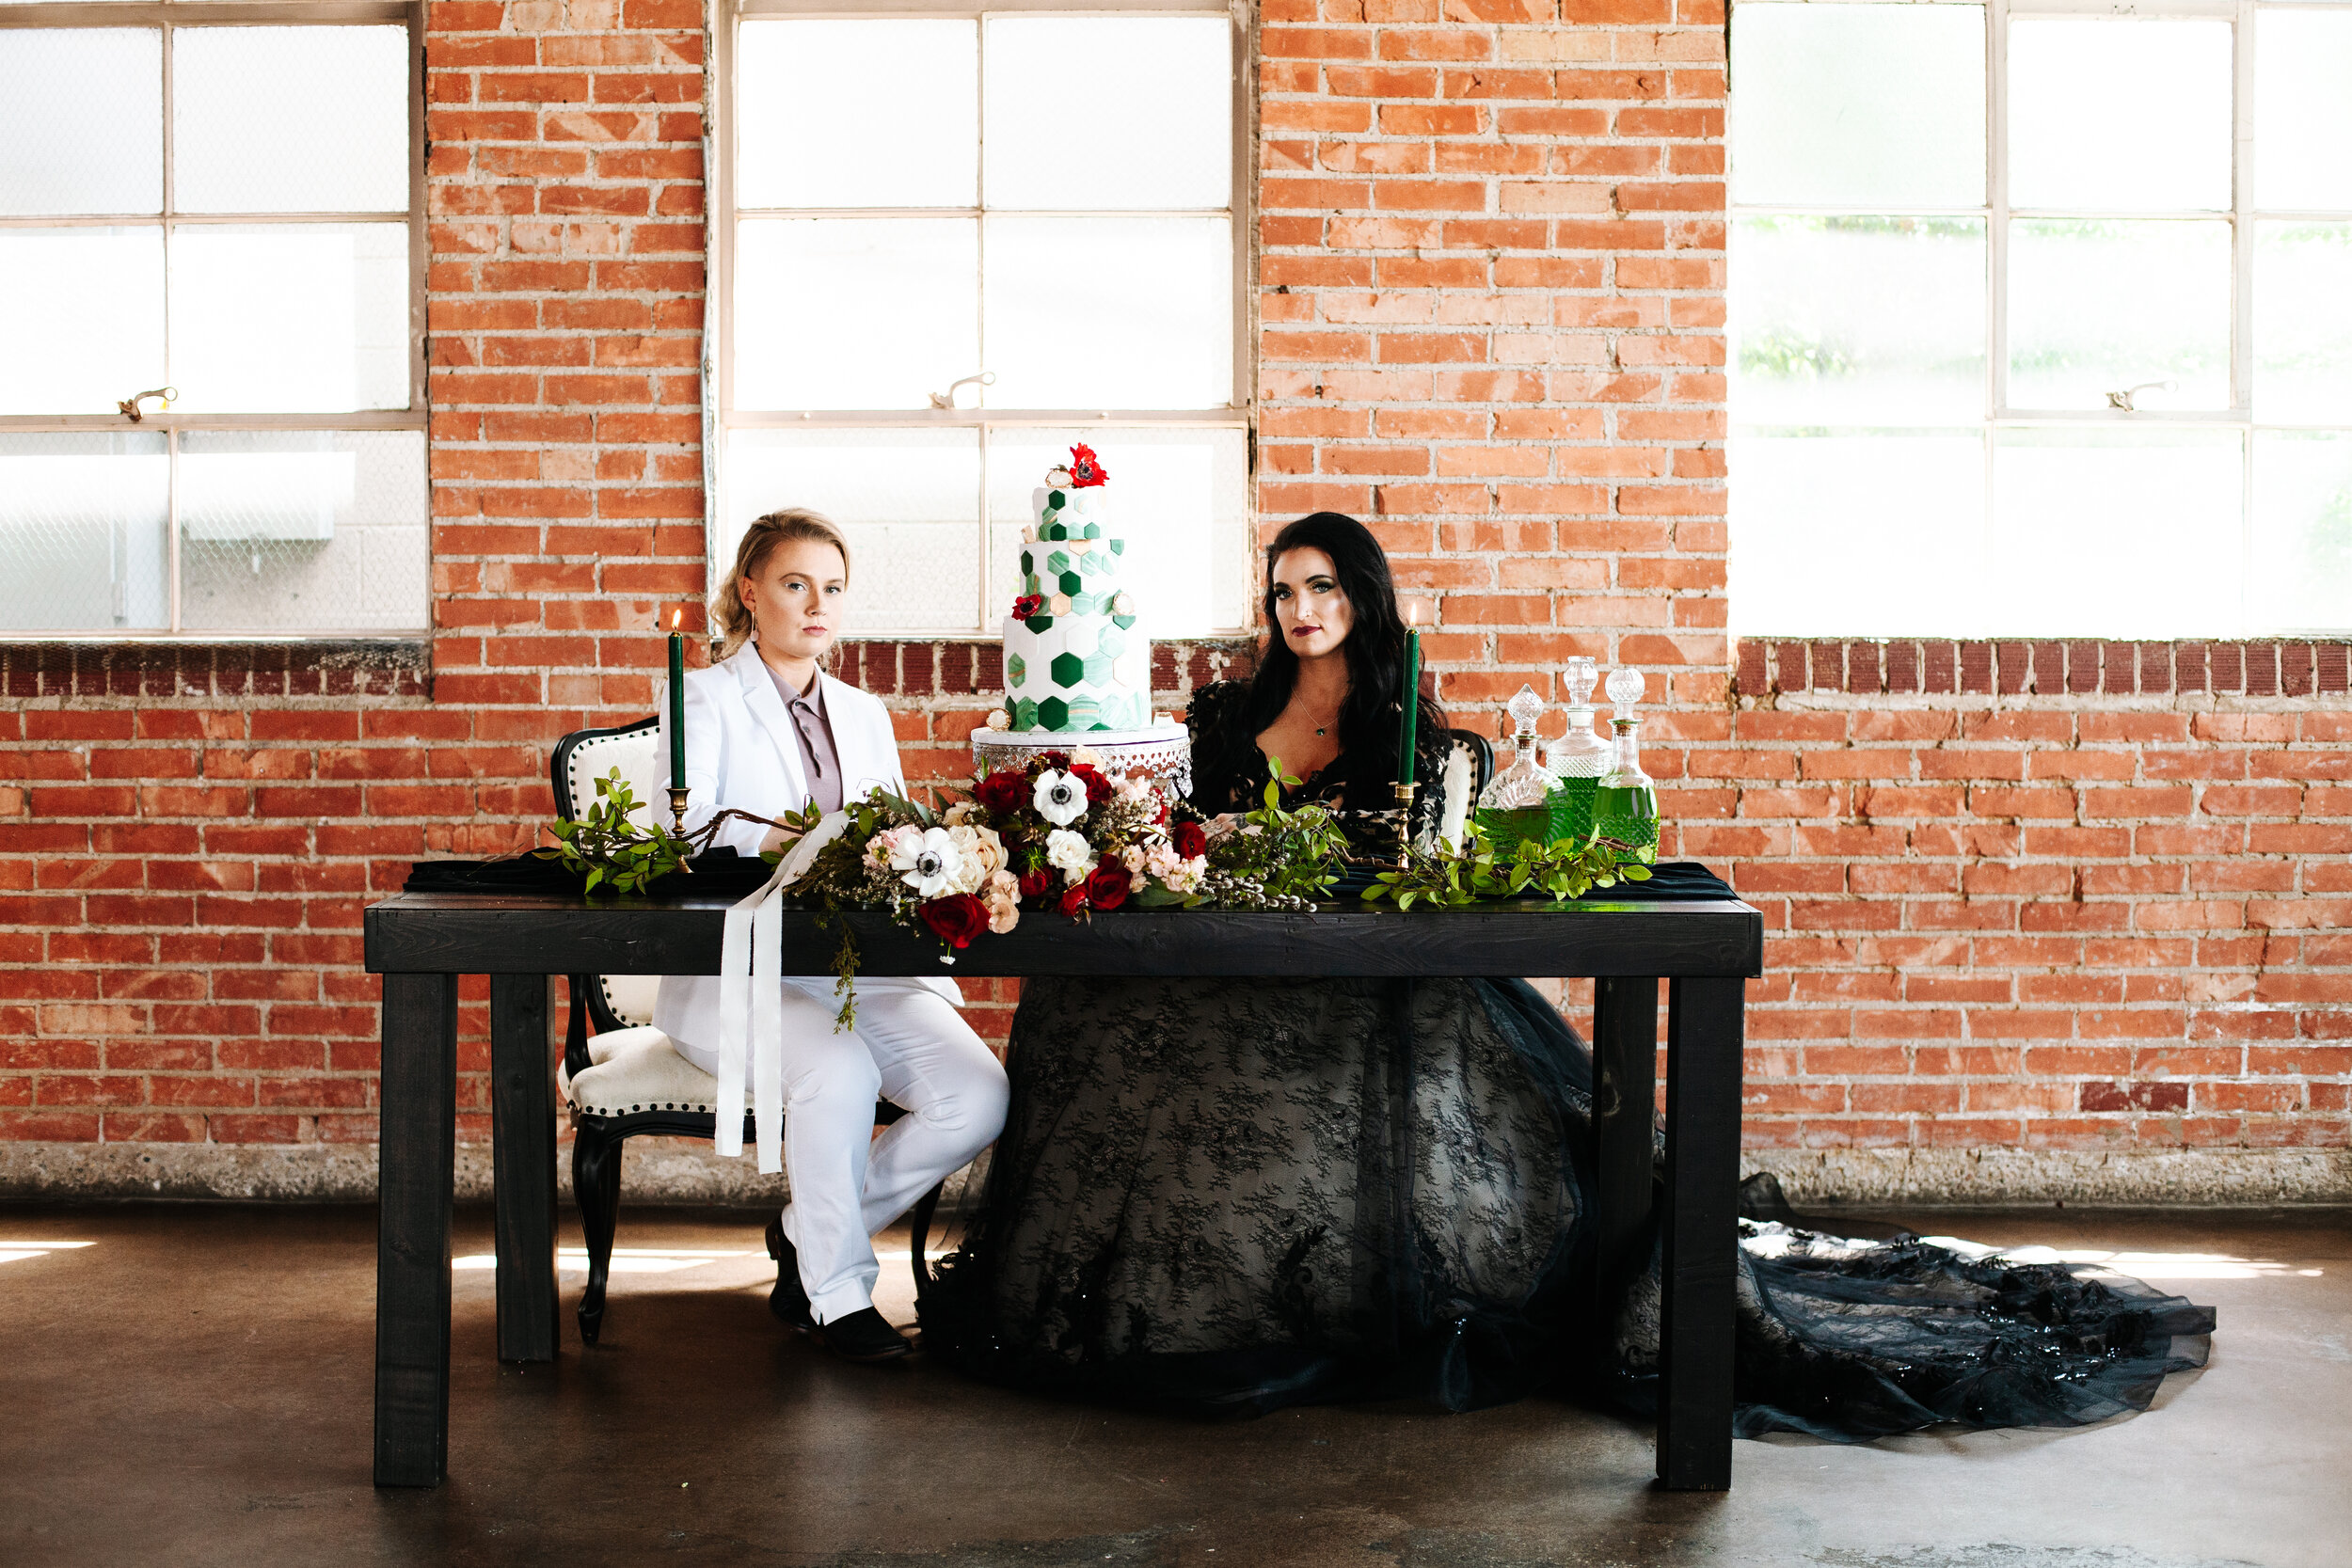 Lesbian couple sit together for their wedding at a sweetheart table decorated with greenery and a bouquet. 